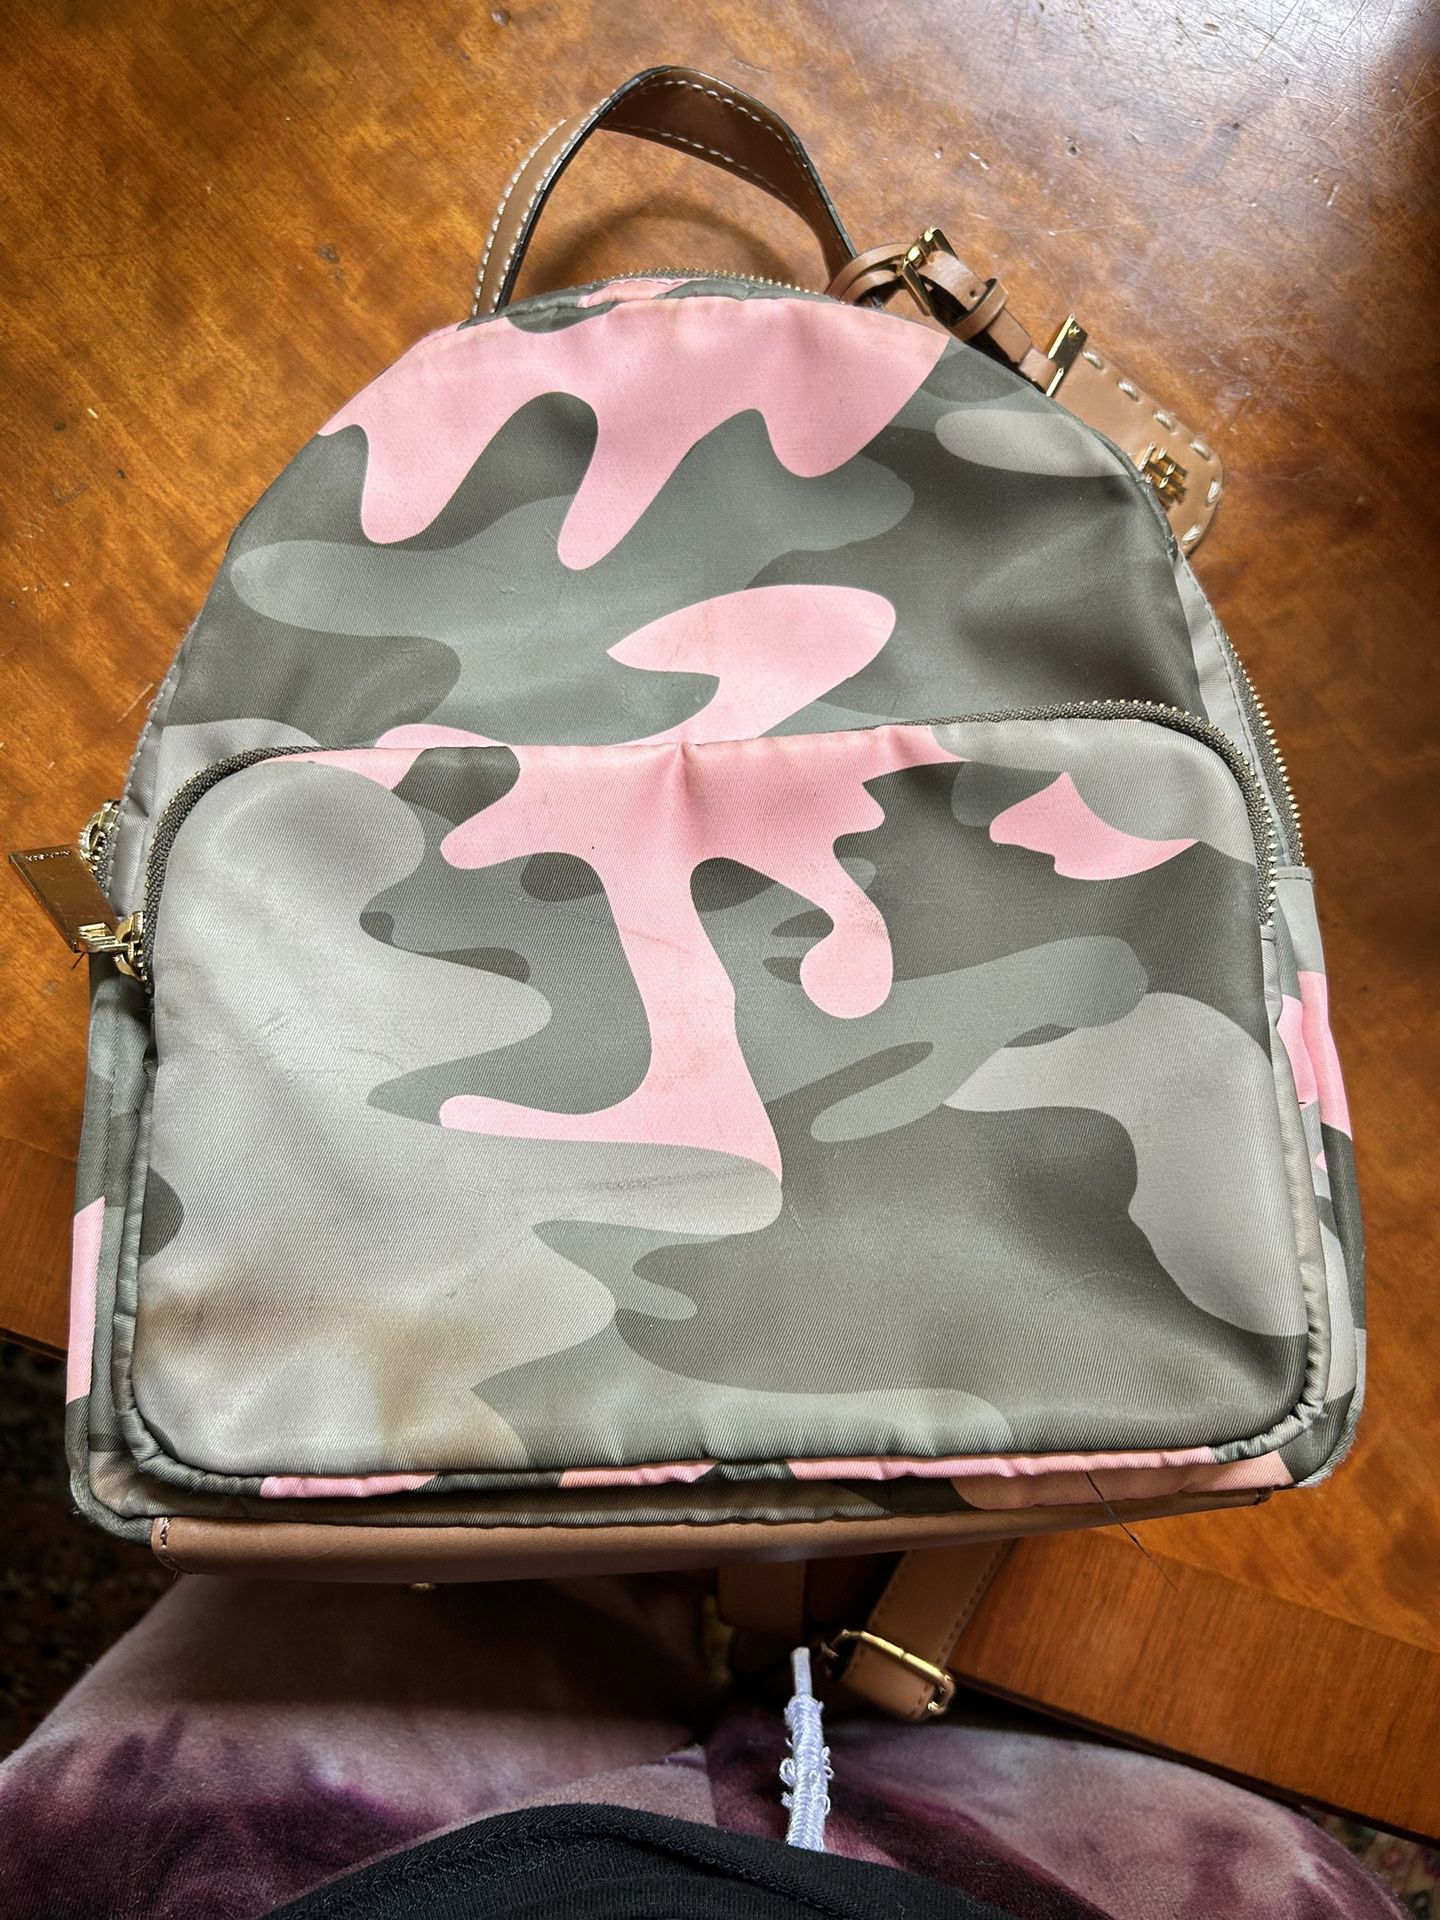 Tommy Hilfiger small backpack. Pink Camo. Check pics for stains. #tommyhilfiger #camo